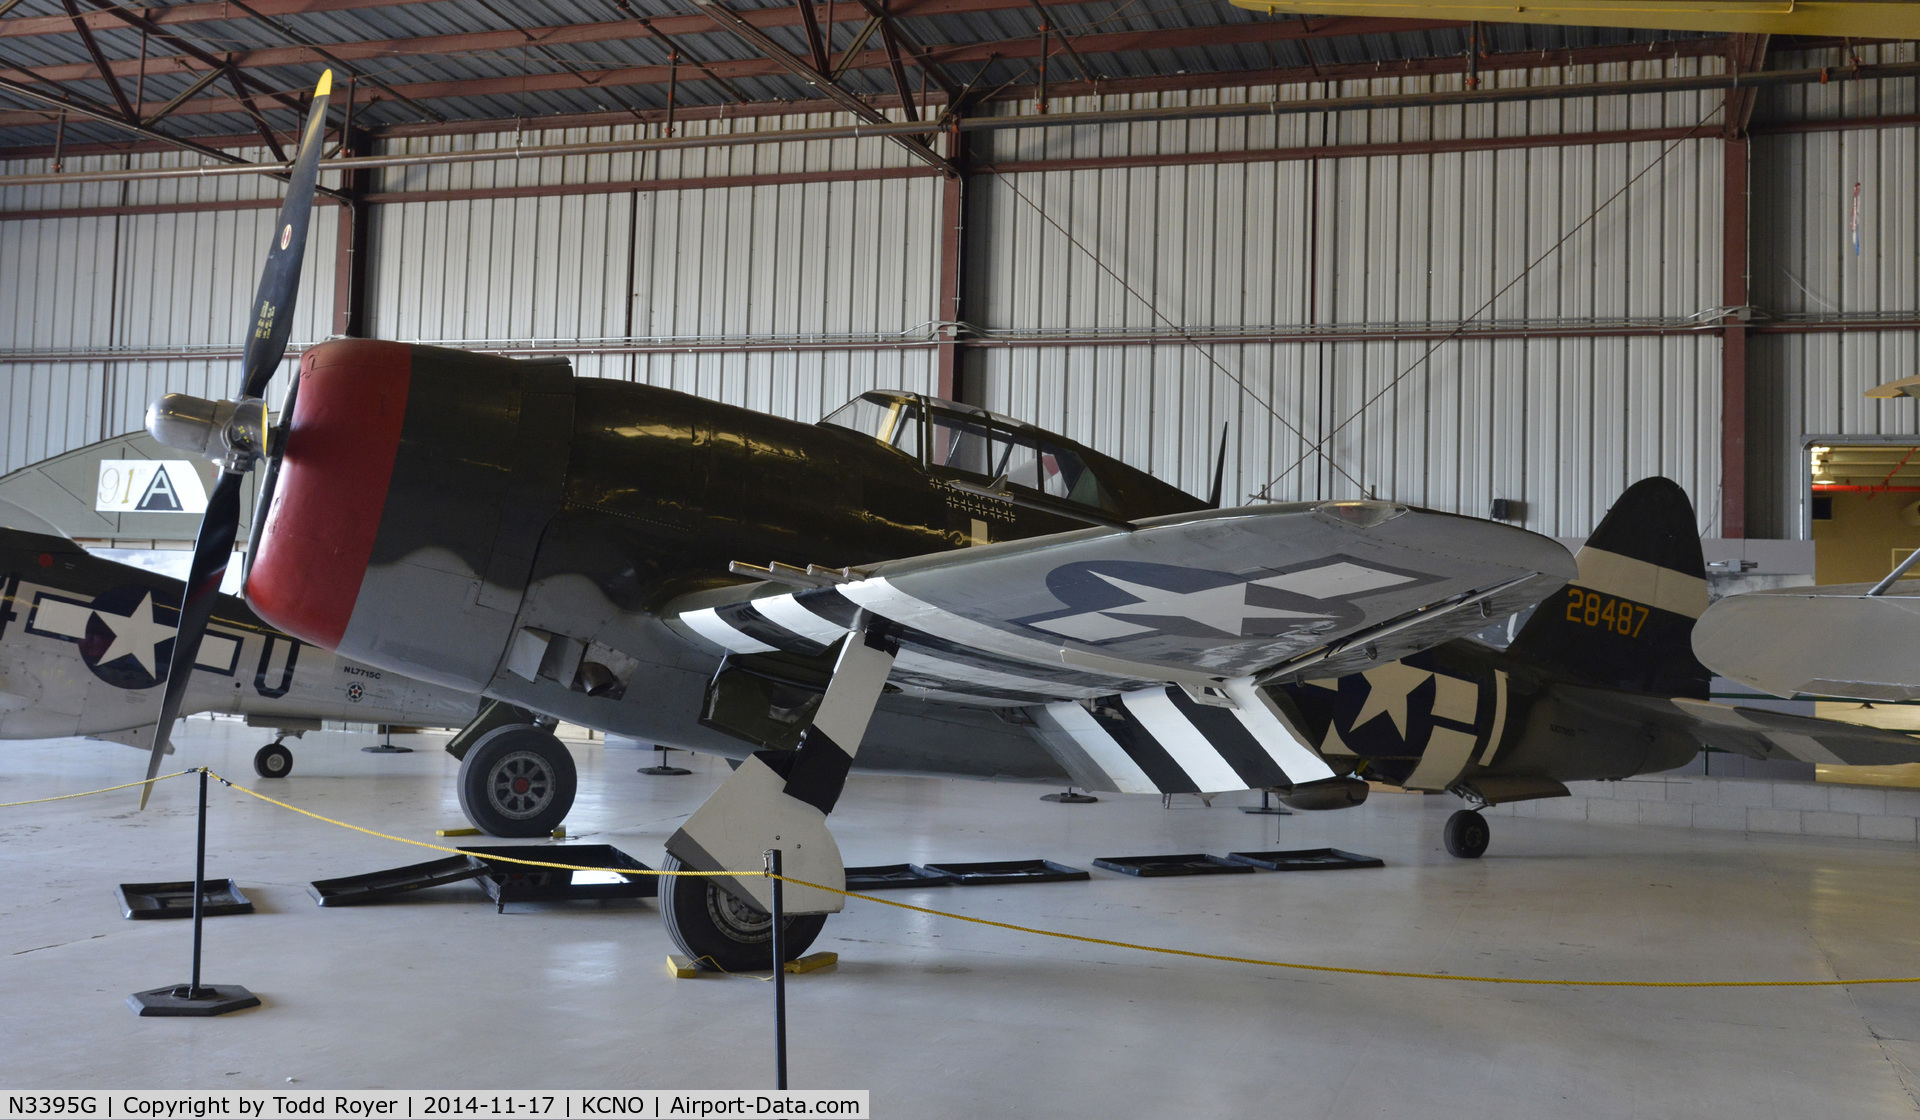 N3395G, 1942 Republic P-47G-15-CU Thunderbolt C/N 42-25254, On display at the Planes of Fame Chino location